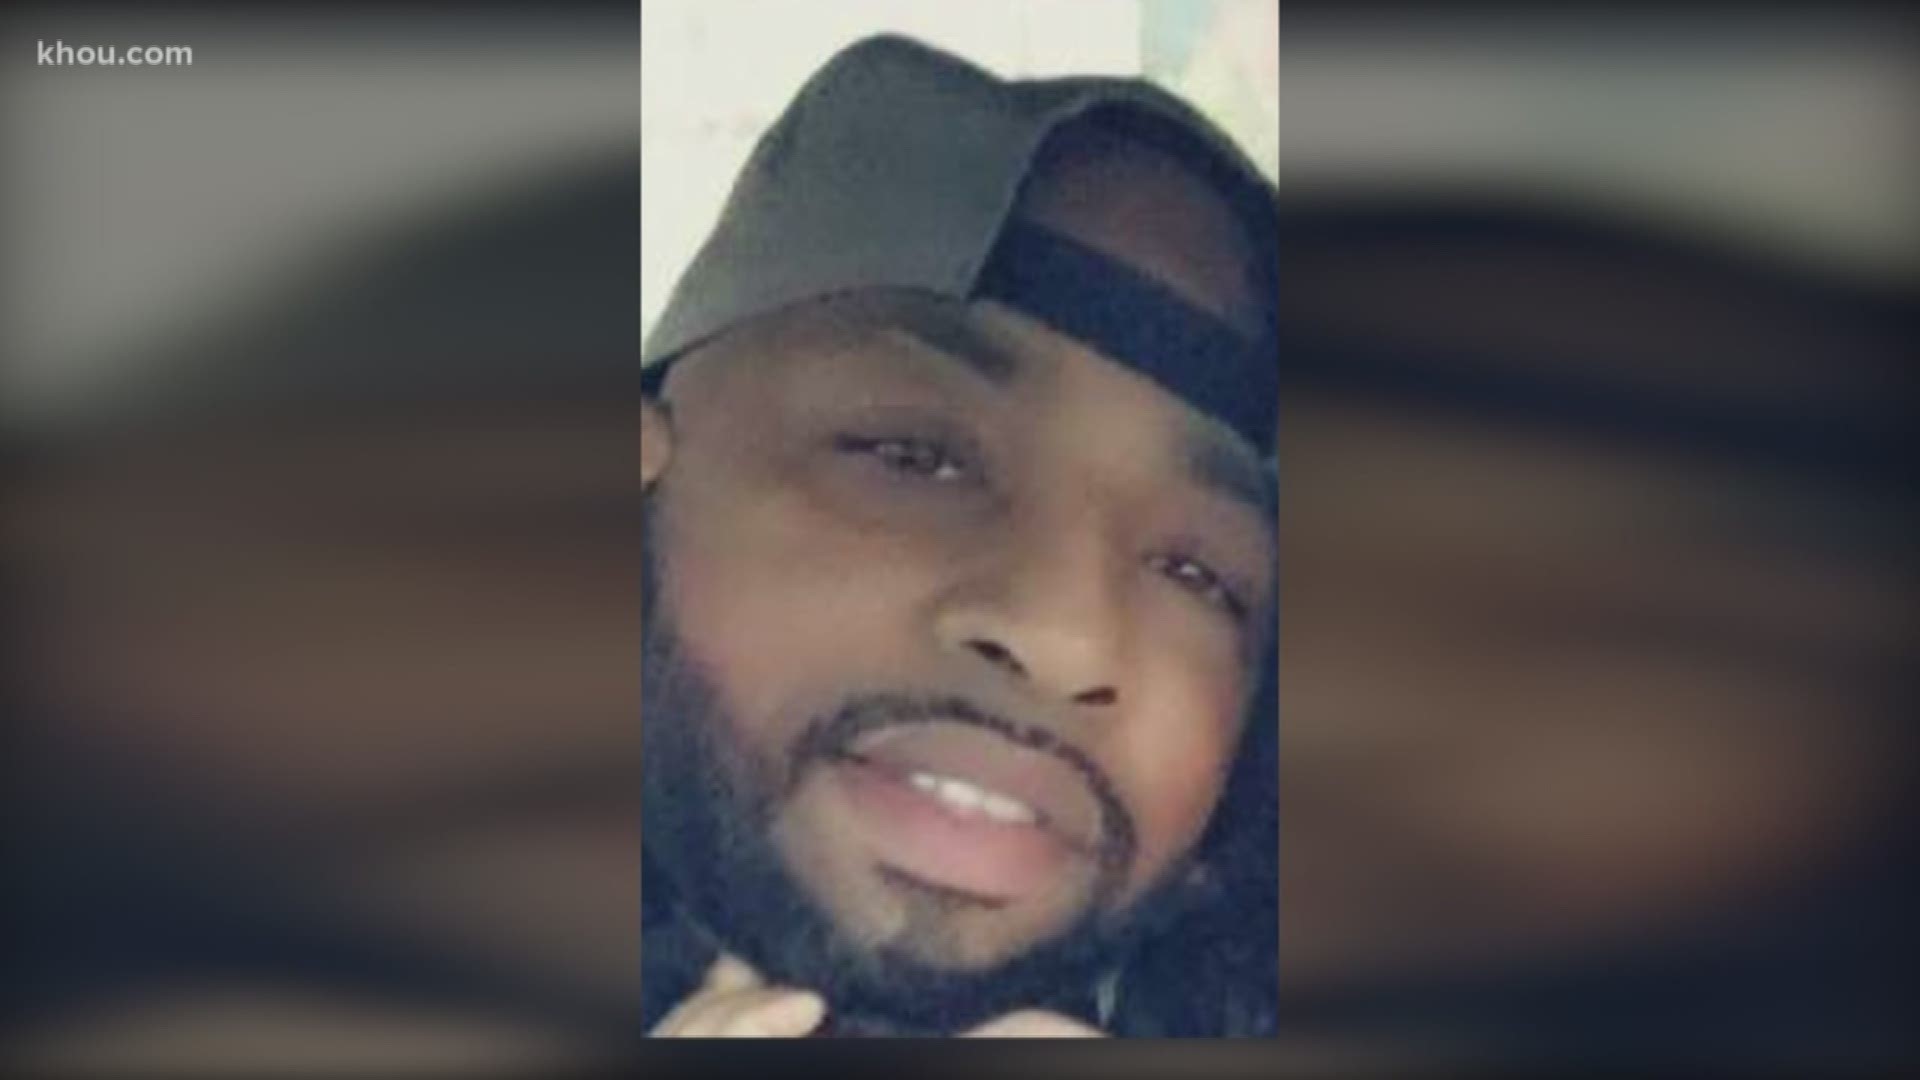 A homeowner known as the "neighborhood watchdog" was found shot to death on his front porch. Detectives said the shooter is still on the run, but they have surveillance video of the suspect's SUV.